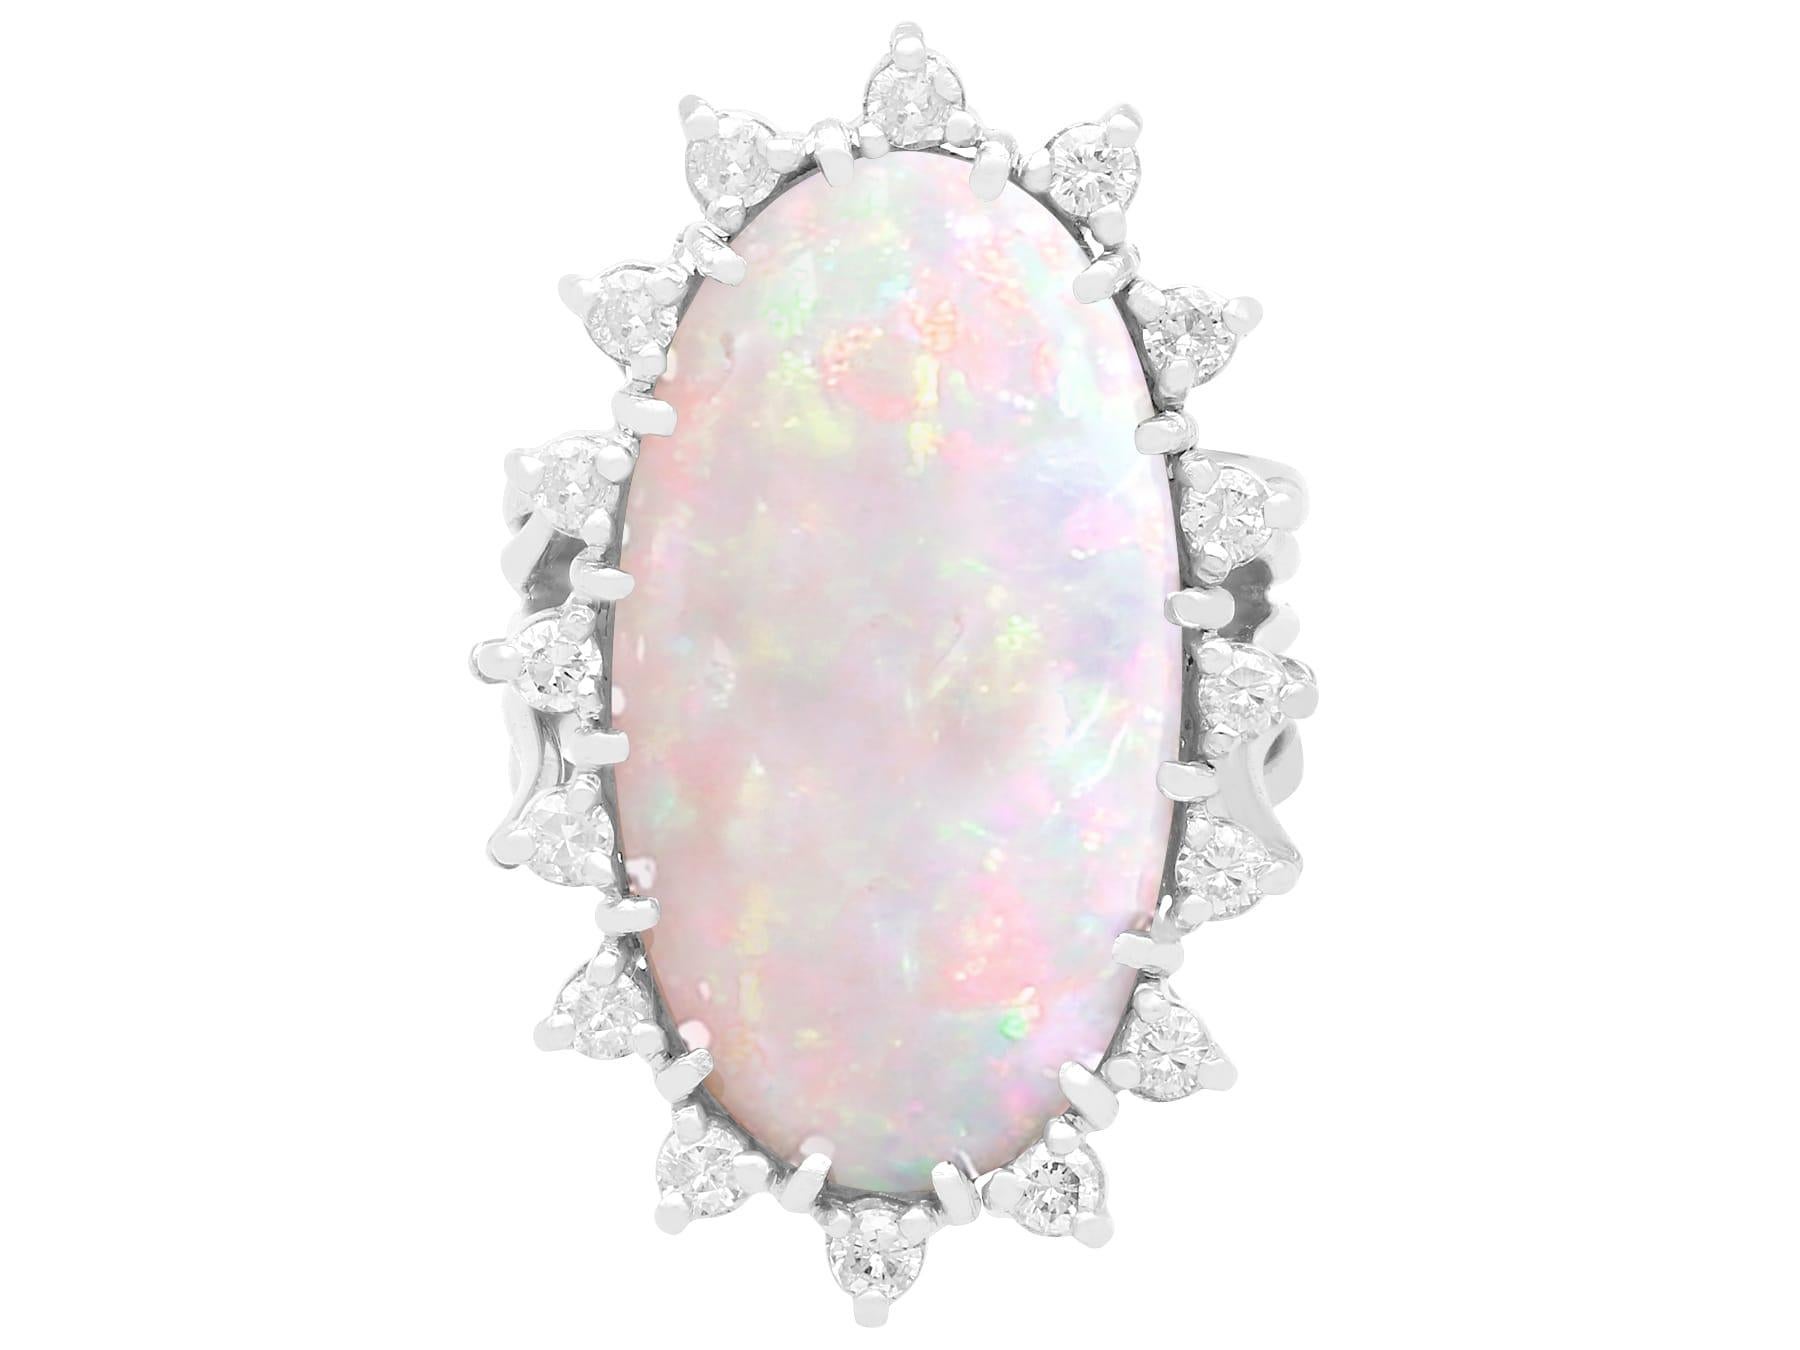 Cabochon Vintage 5.15ct White Opal and Diamond Gold Cocktail Ring For Sale